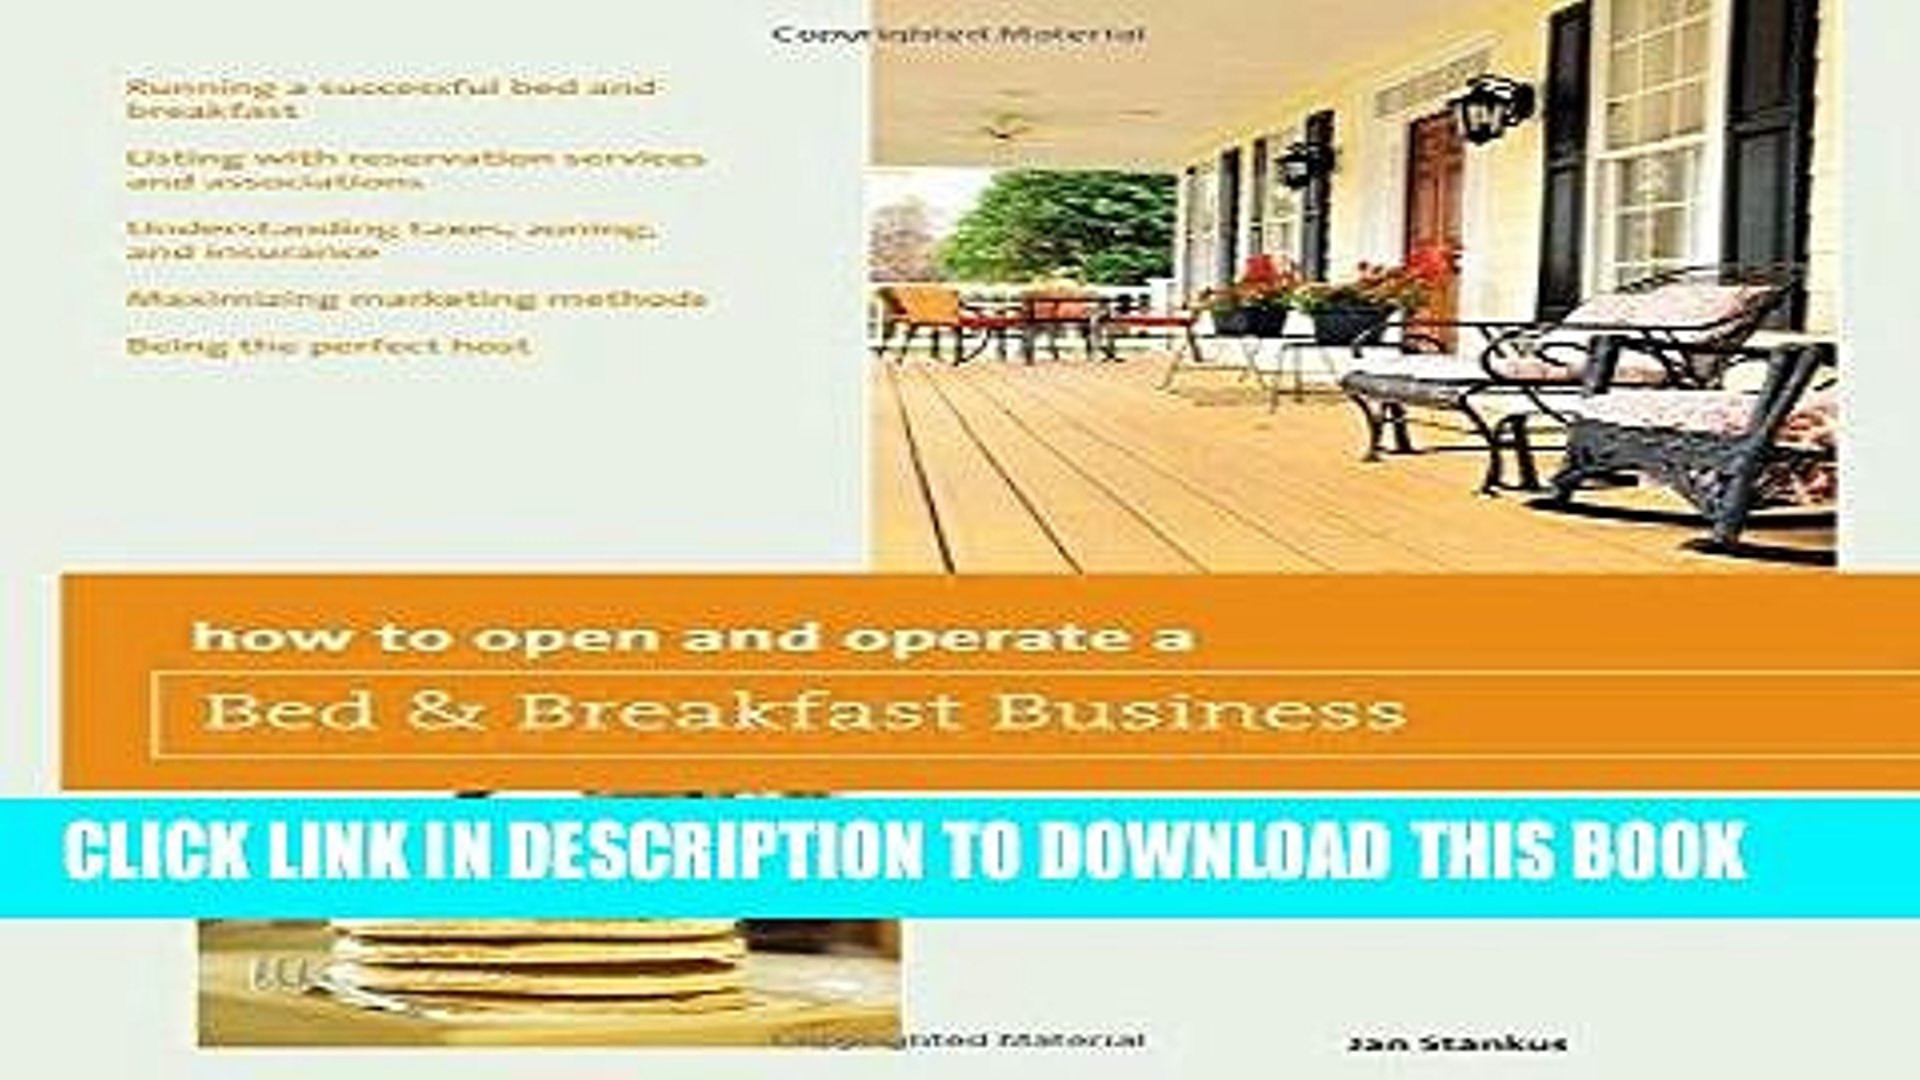 starting a hardwood flooring business of pdf how to open and operate a bed breakfast home based business with regard to pdf how to open and operate a bed breakfast home based business series popular collection video dailymotion